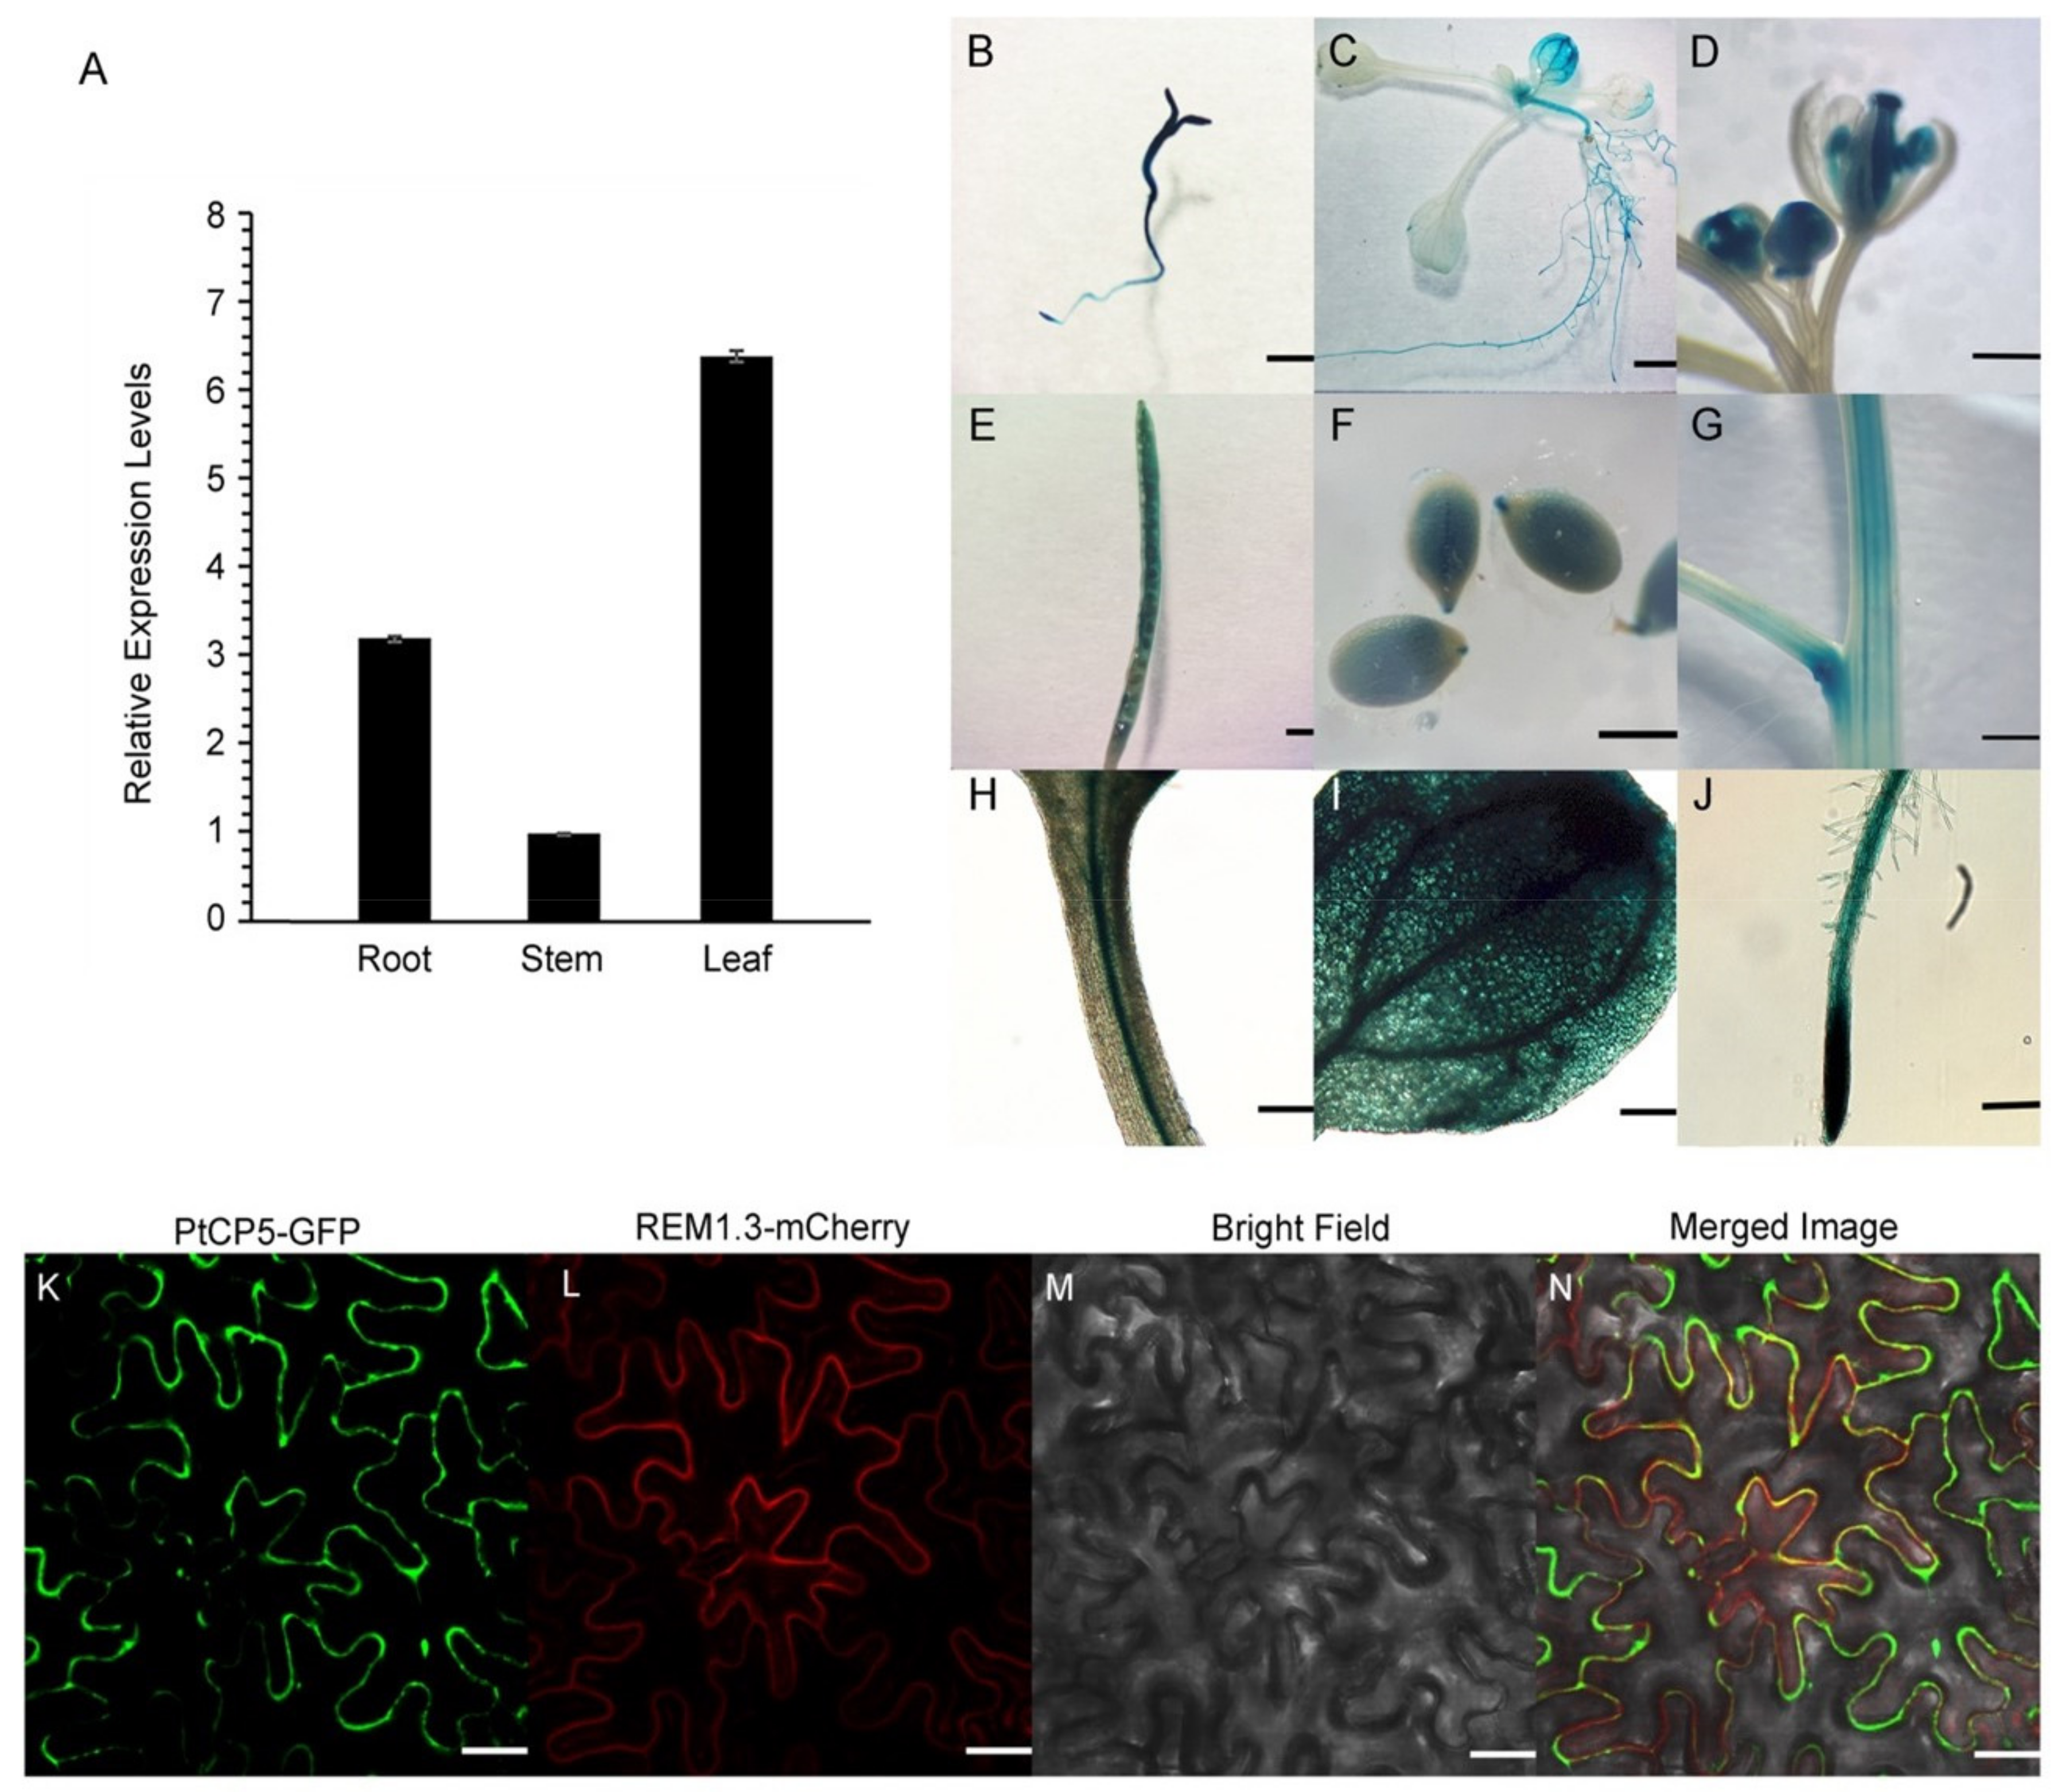 PSV form through remodeling of the LV in Arabidopsis leaf cells